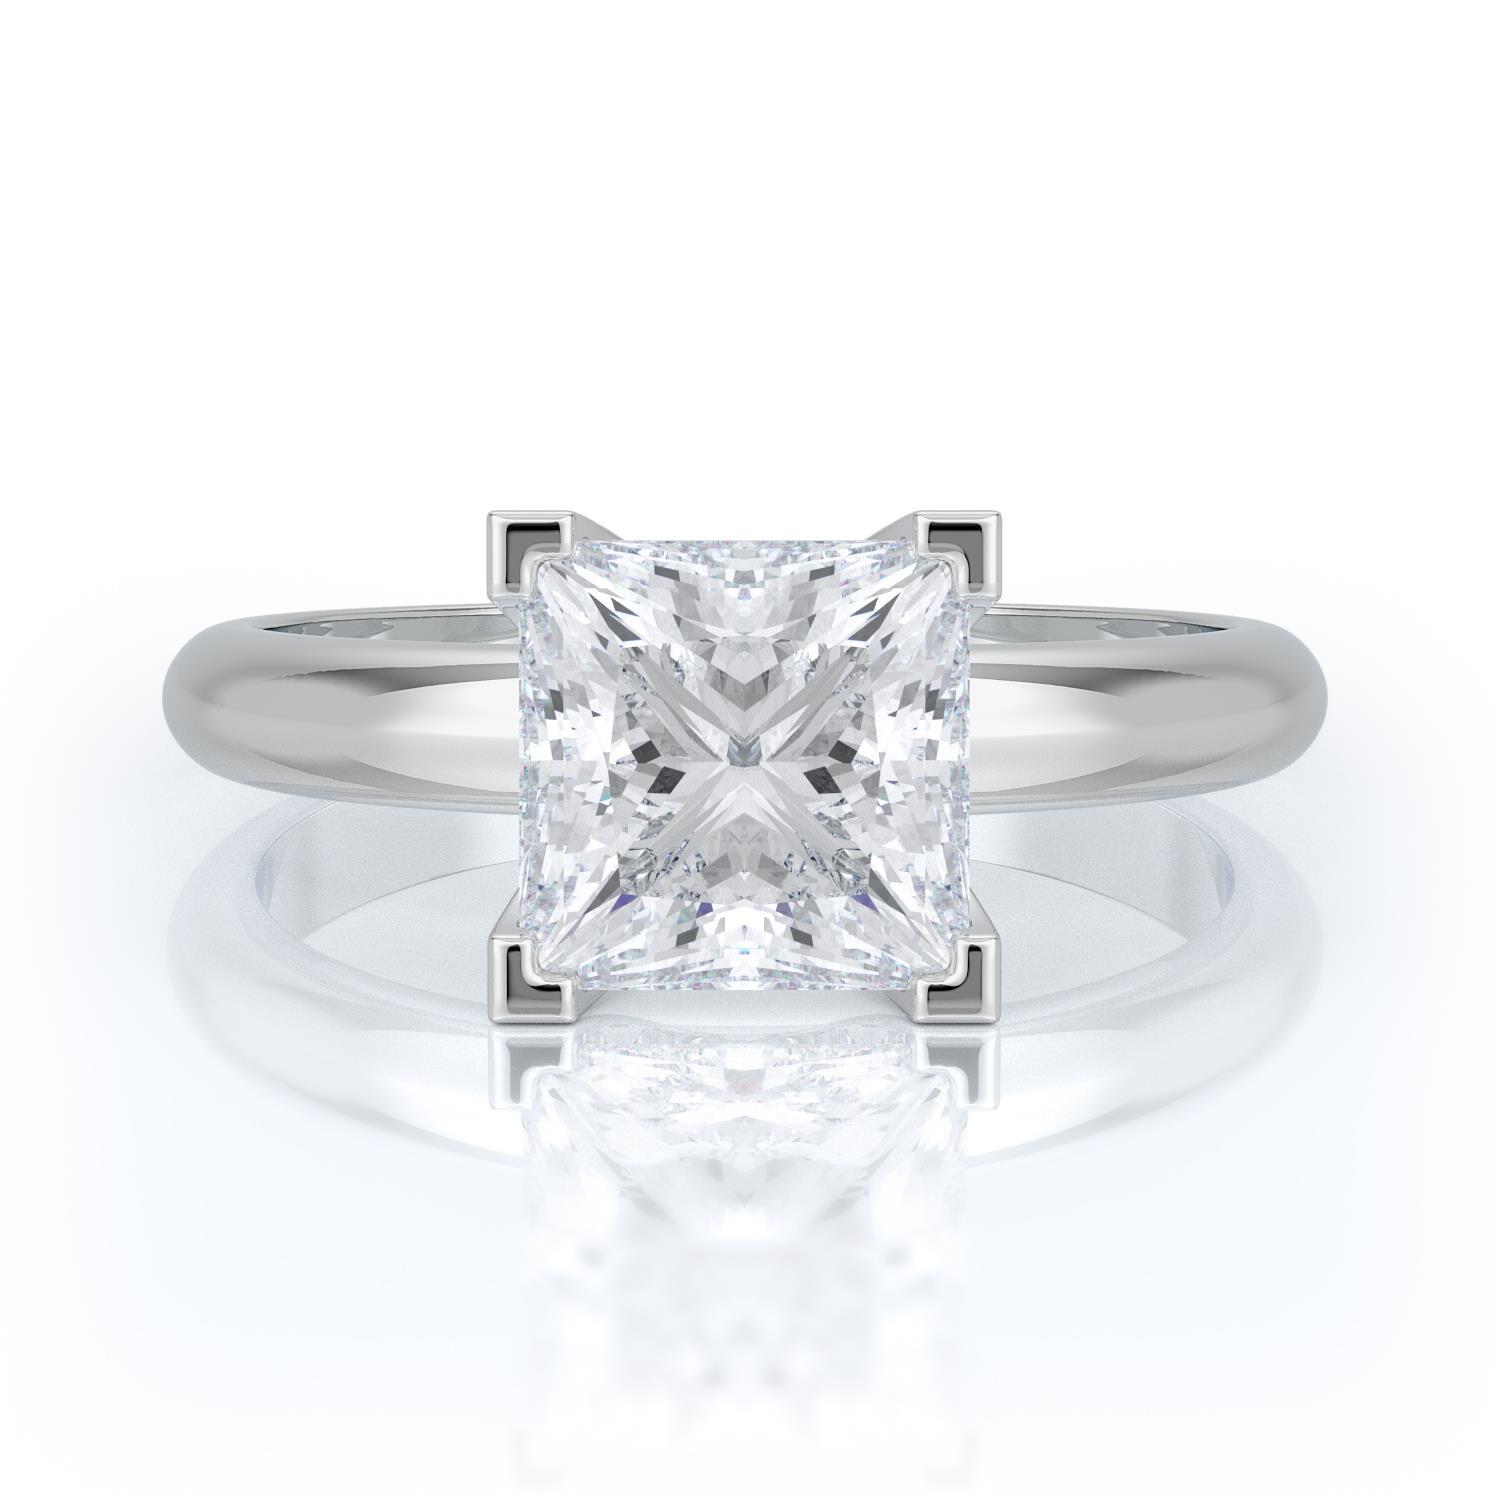 3 Carat Princess Cut Solitaire Diamond Ring Online Store, UP TO 56 